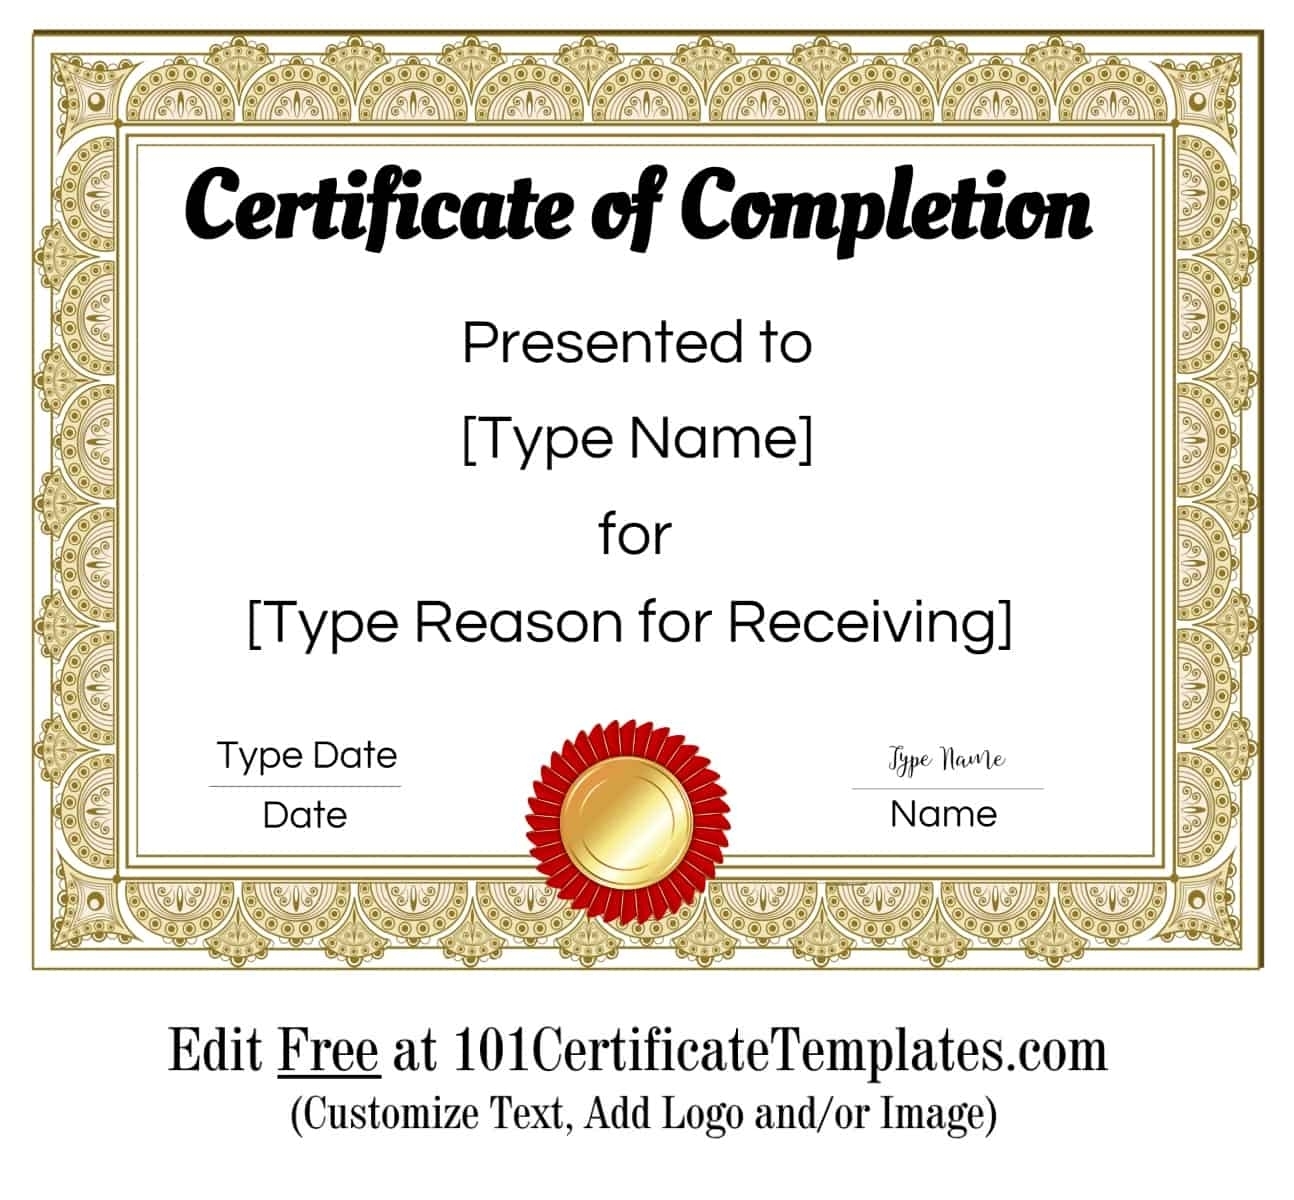 Free Certificate Of Completion | Customize Online Then Print With Regard To Certification Of Completion Template